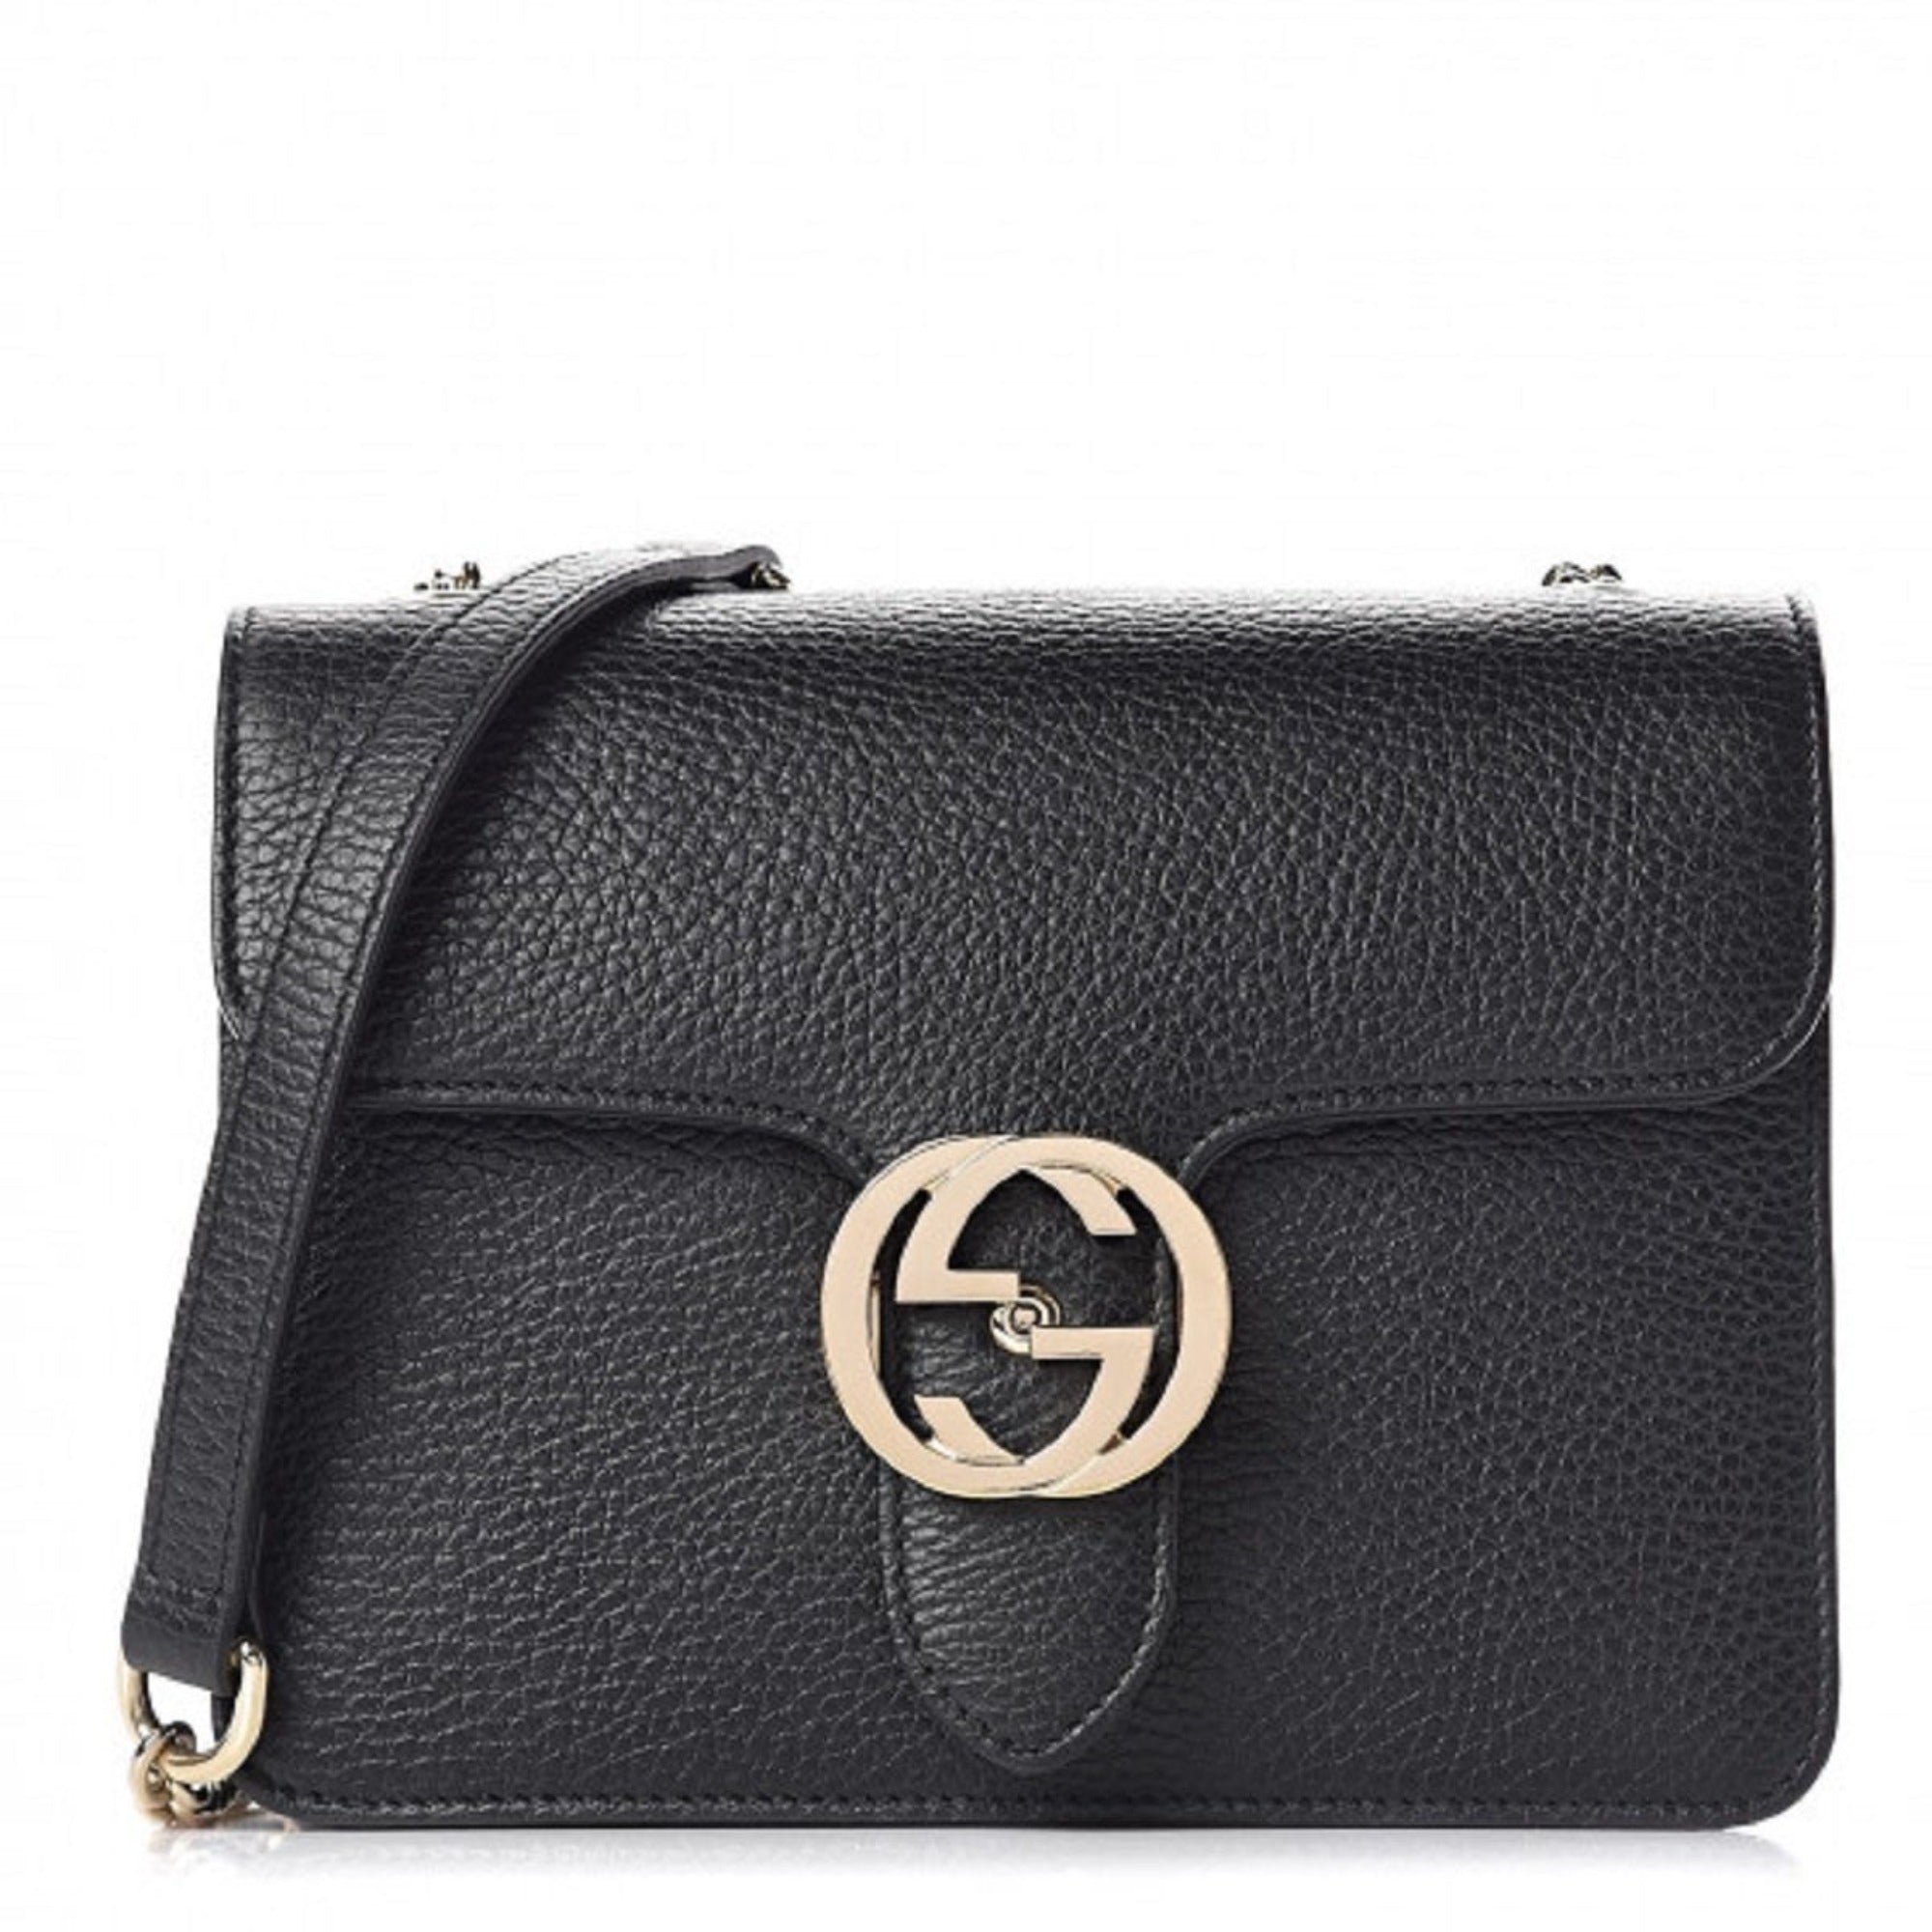 Gucci Marmont Black Icon GG Interlocking Small Cross Body Bag 510304 at_Queen_Bee_of_Beverly_Hills